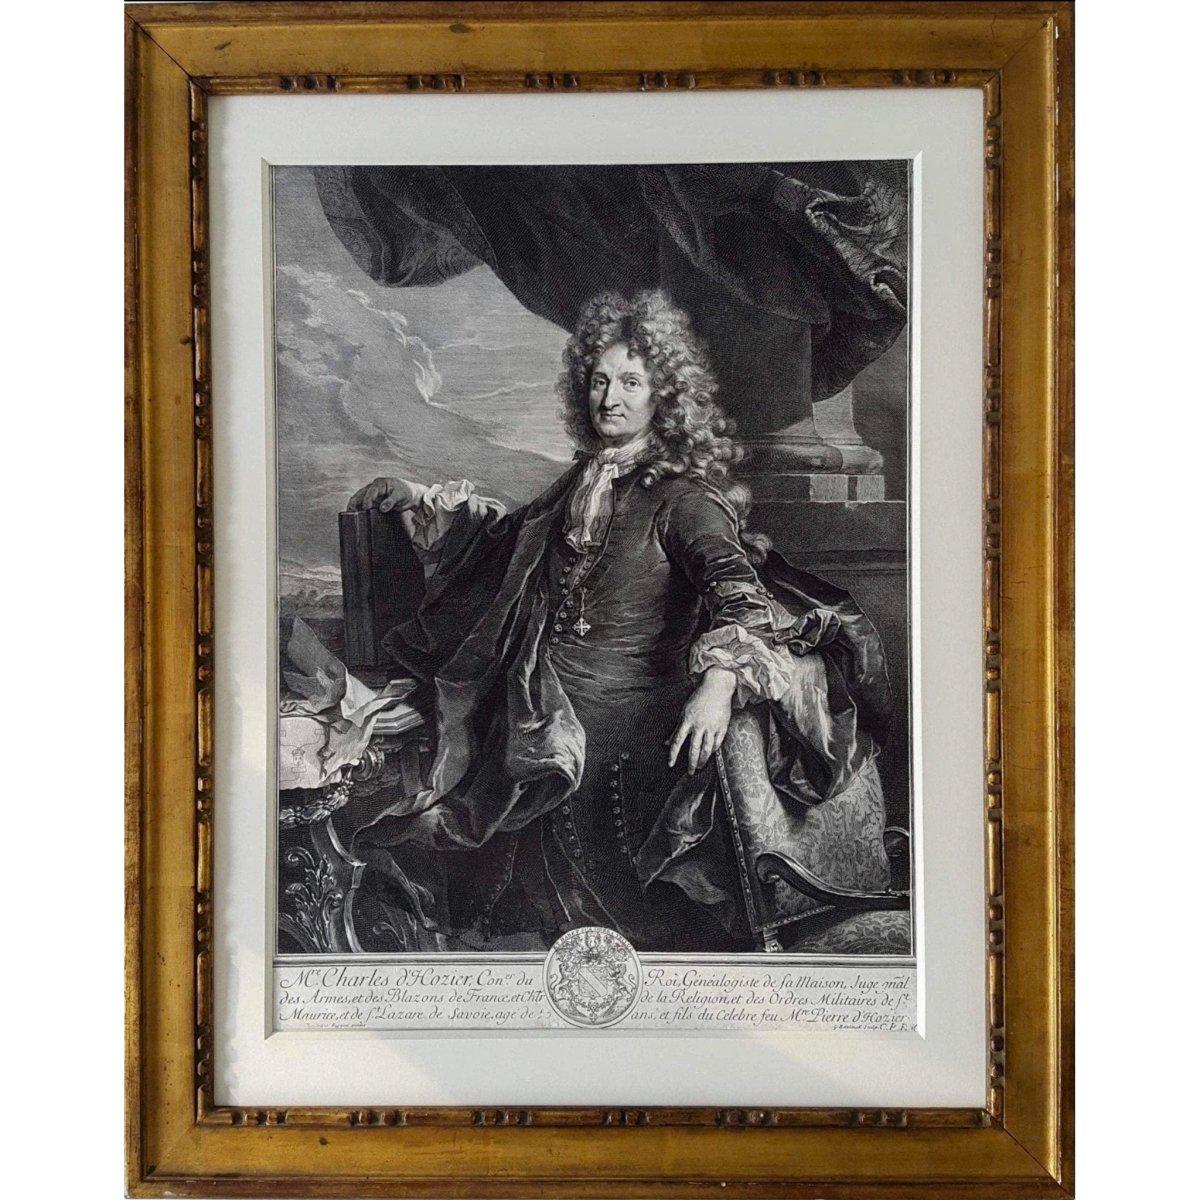 Antique portrait engraving Charles d'Hozier after Rigaud 1691 by Gérard Edelinck for sale at winckelmann gallery